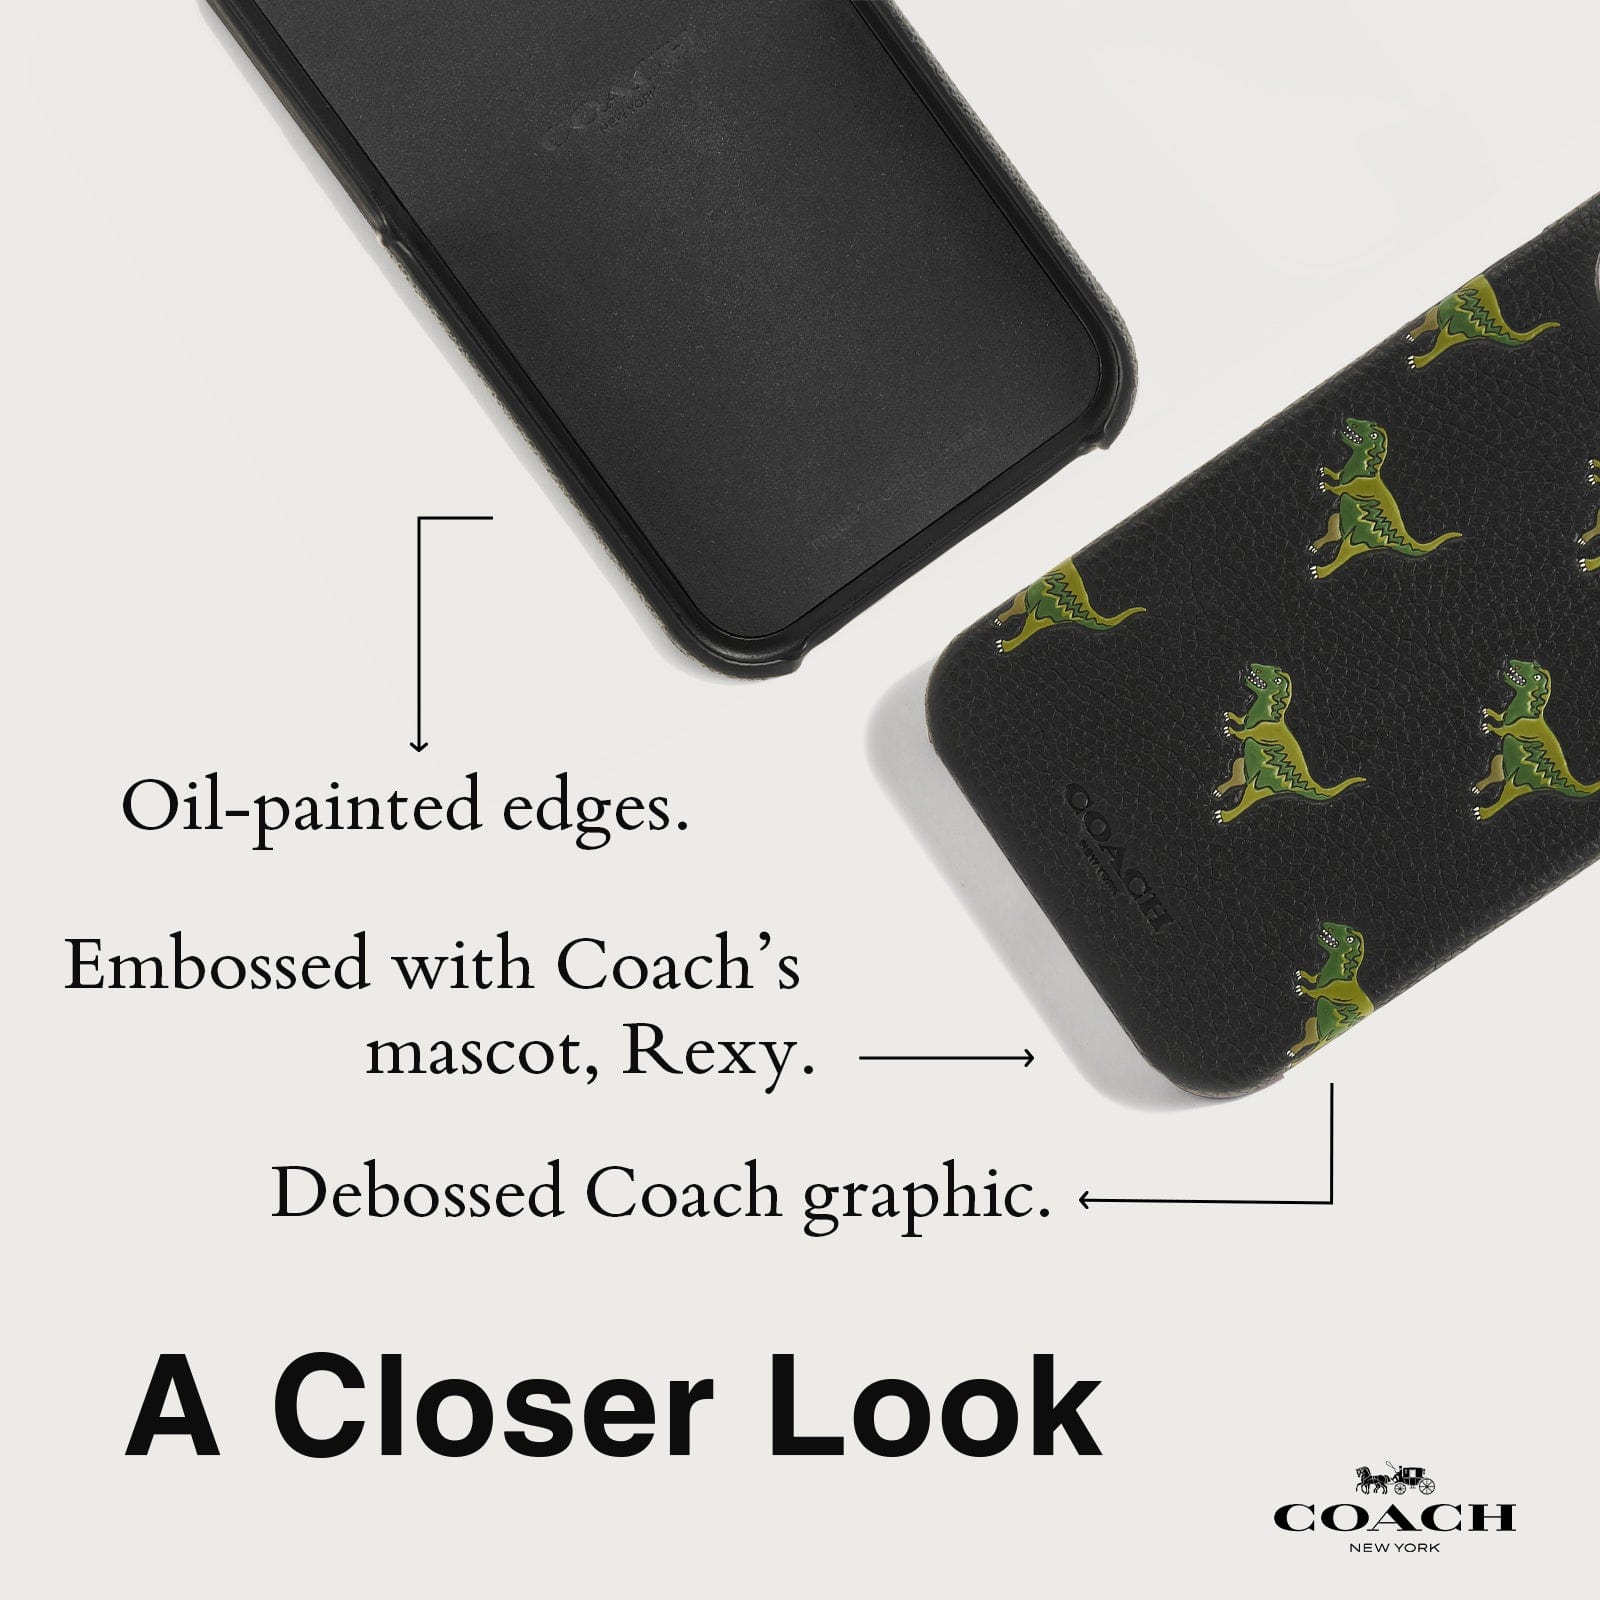 OIL PAINTED EDGES. EMBOSSED WITH COACH;S MAXCOT, REXY. DEBOSSED COACH GRAPHIC. A CLOSER LOOK.